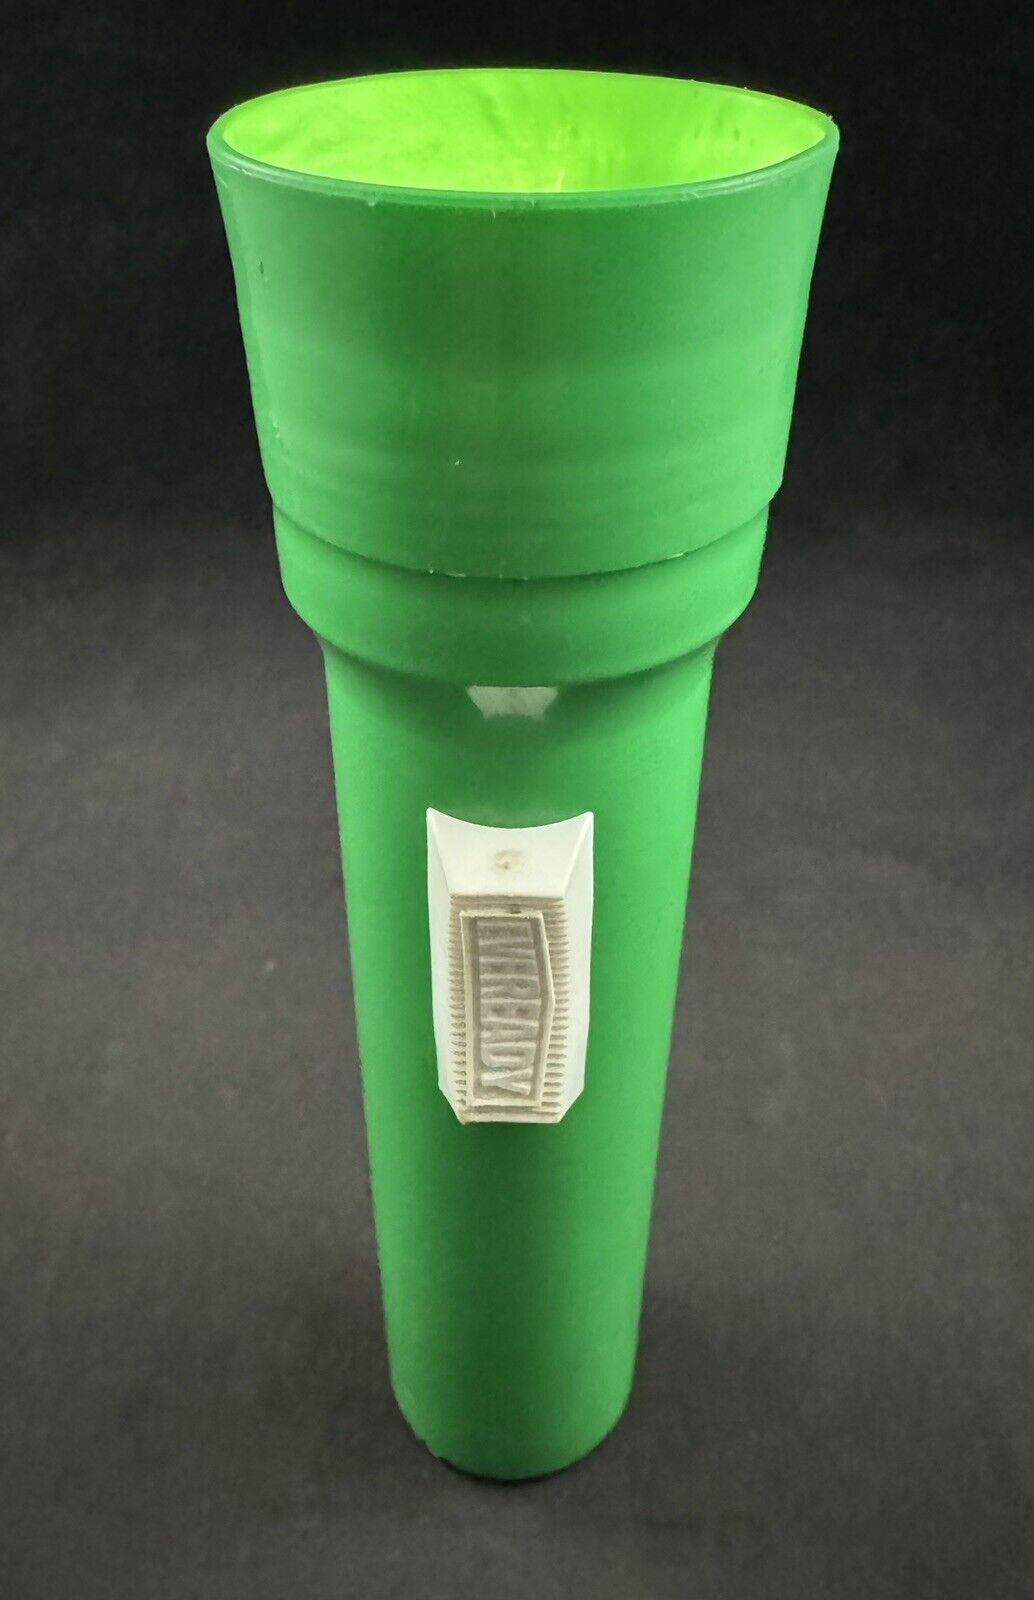 Vintage Eveready Green Plastic Flashlight - Made in USA